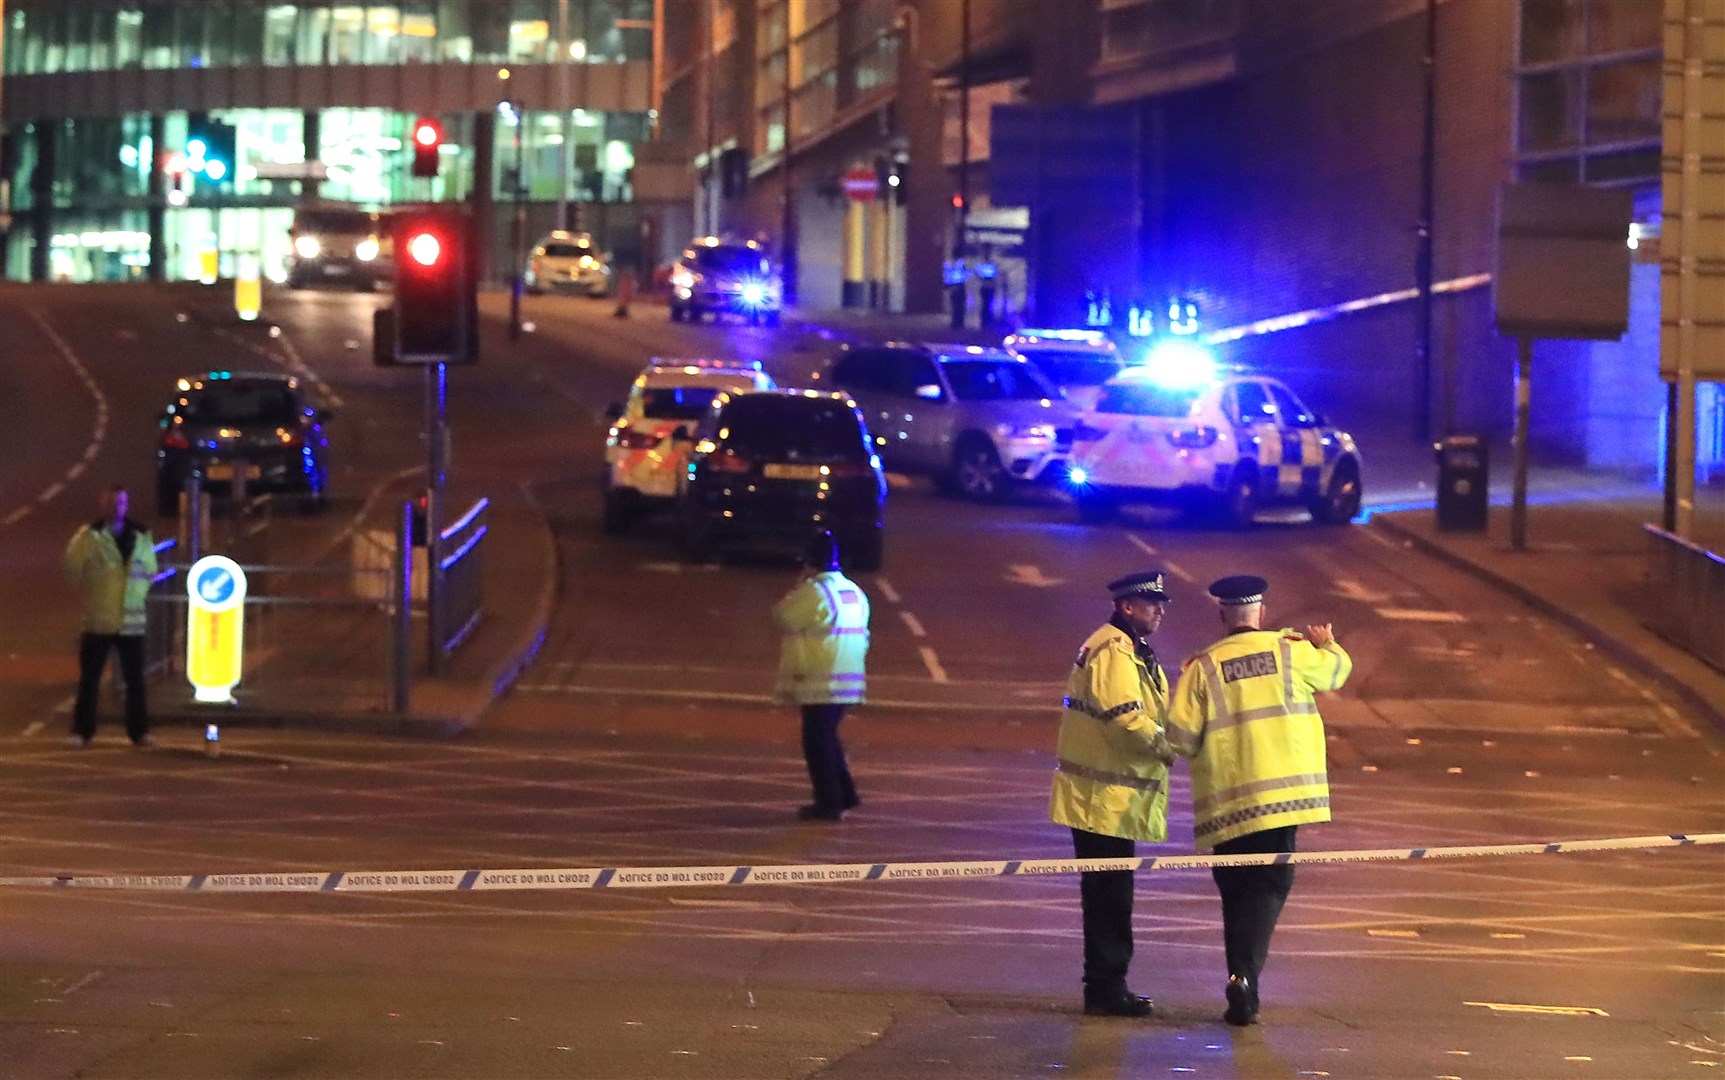 The scene close to the Manchester Arena after the terror attack at an Ariana Grande concert on May 22 2017 (Peter Byrne/PA)